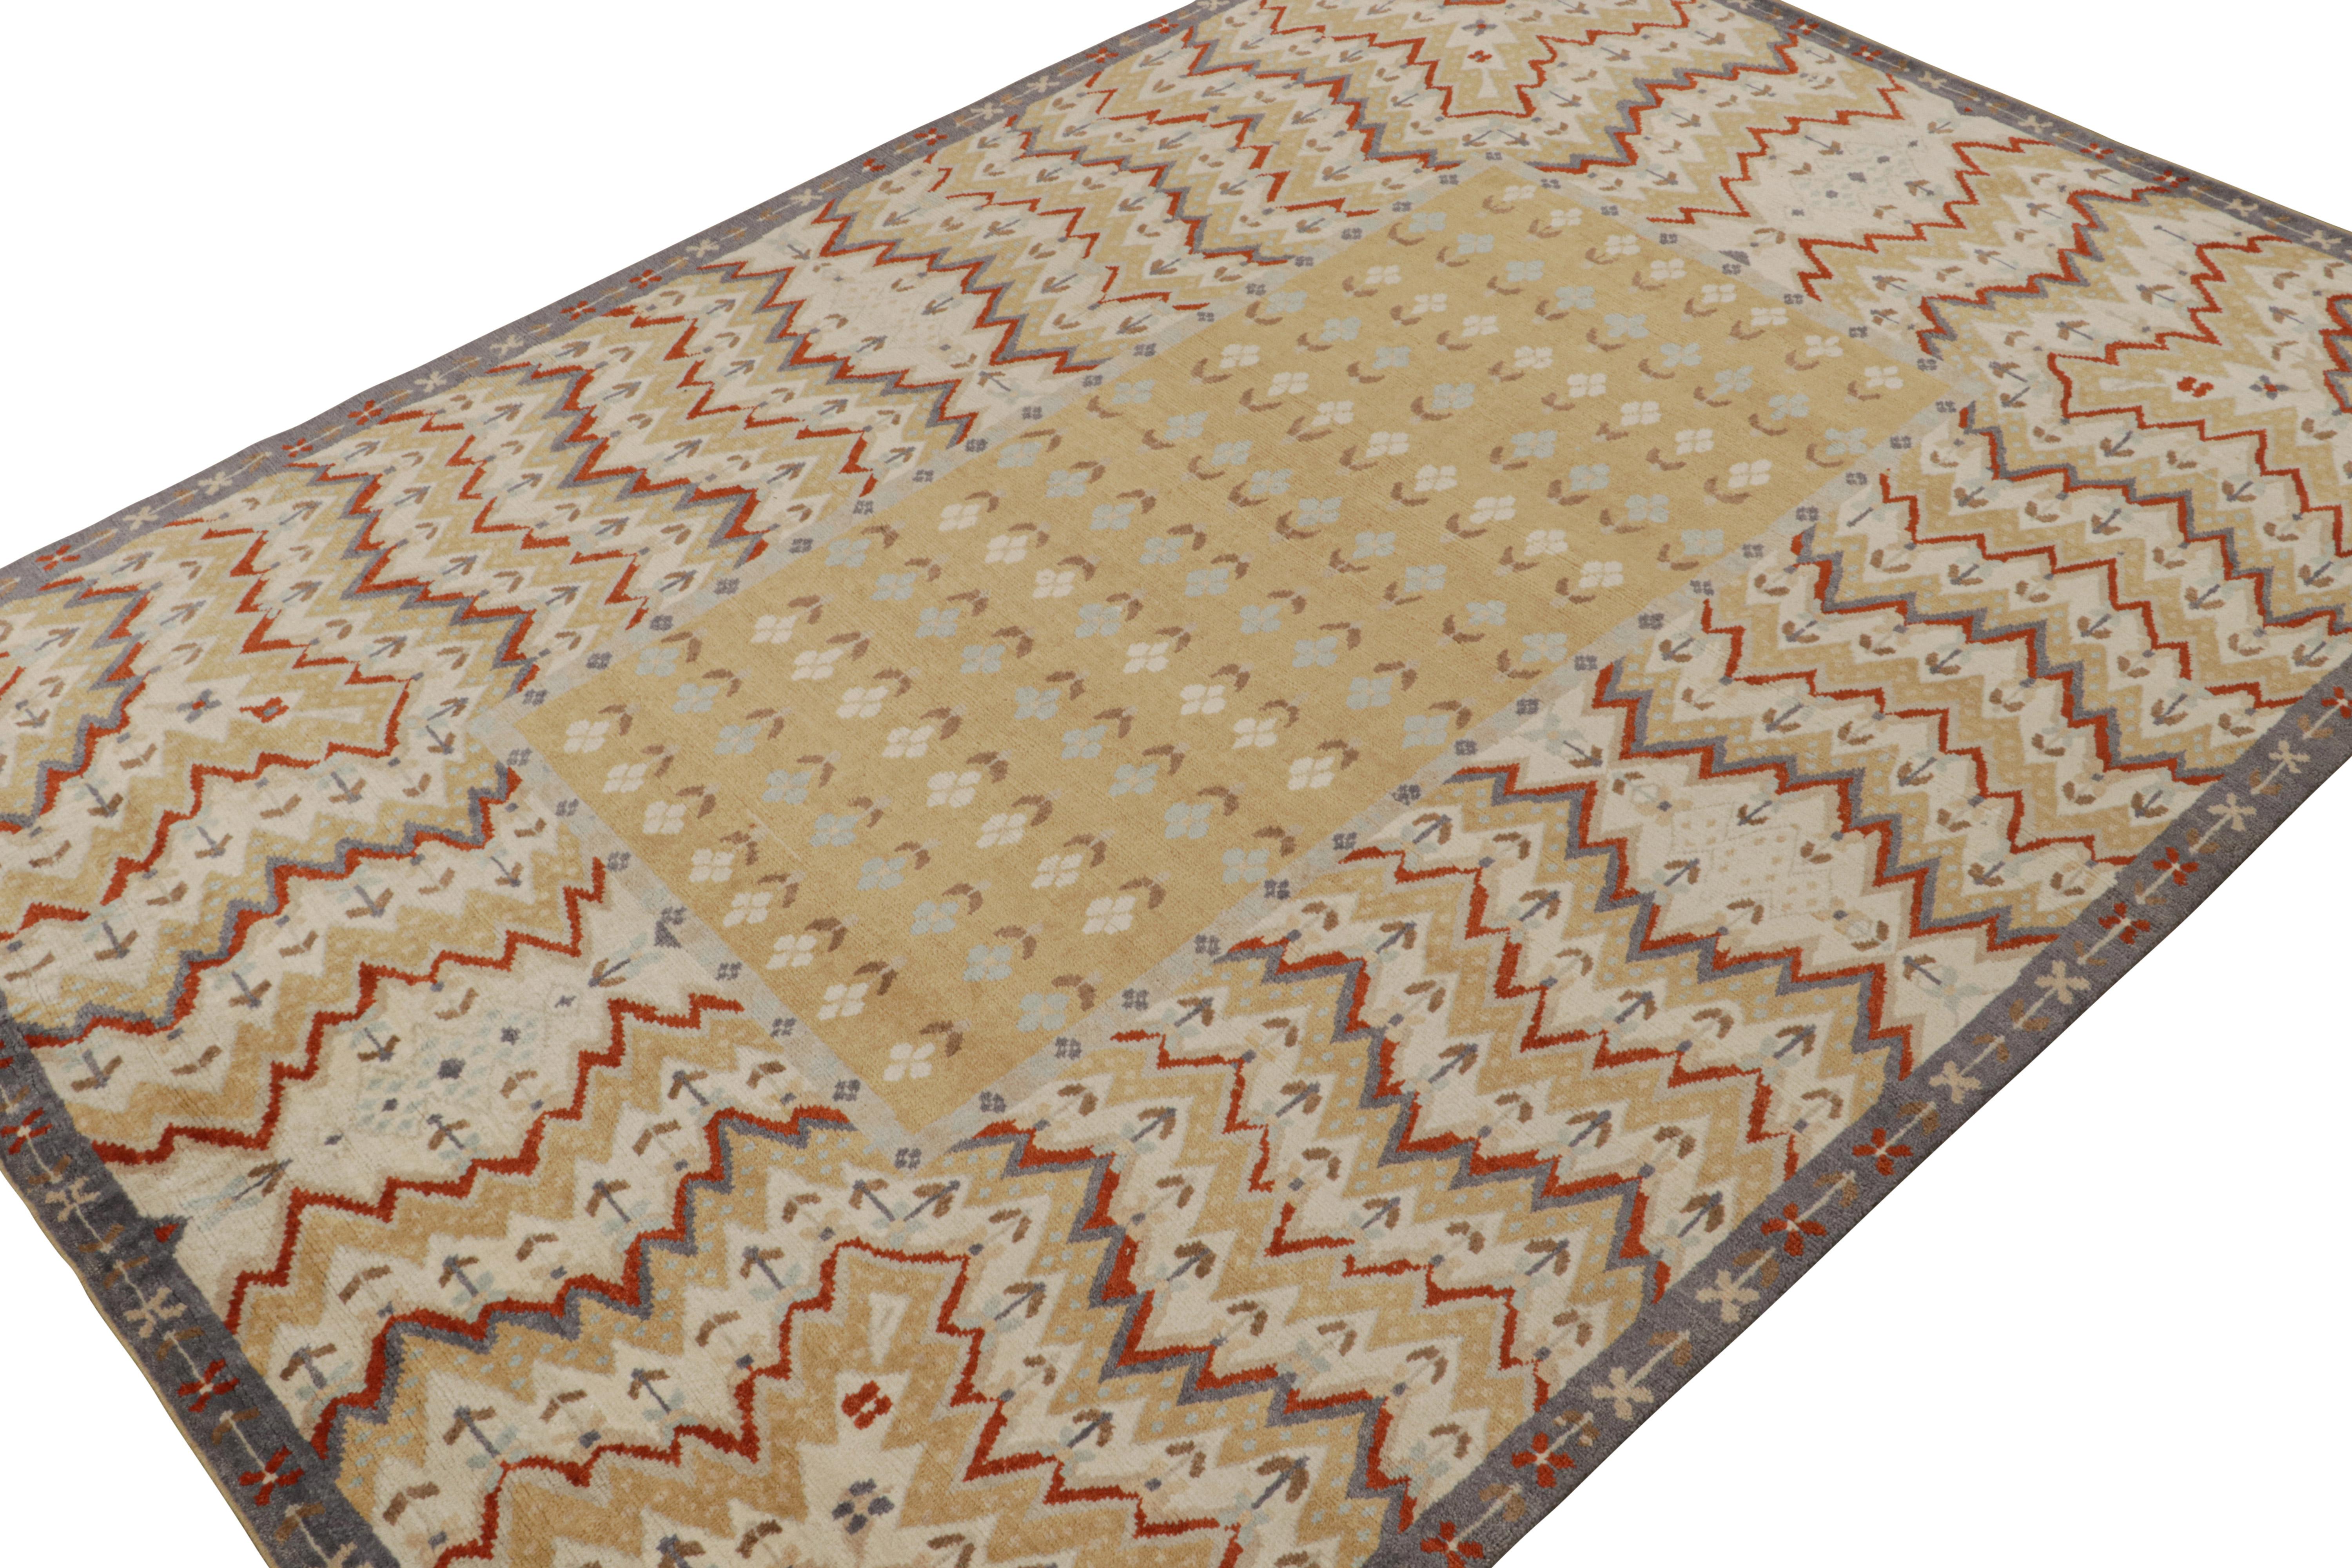 Handknotted in wool, a 10x14 piece from Rug & Kilim’s Modern Classics collection.

On the Design

This piece marks a new take on tribal rugs with dense geometric patterns in tones of gold, gray & red.

Custom Capable:

All sizes and colors